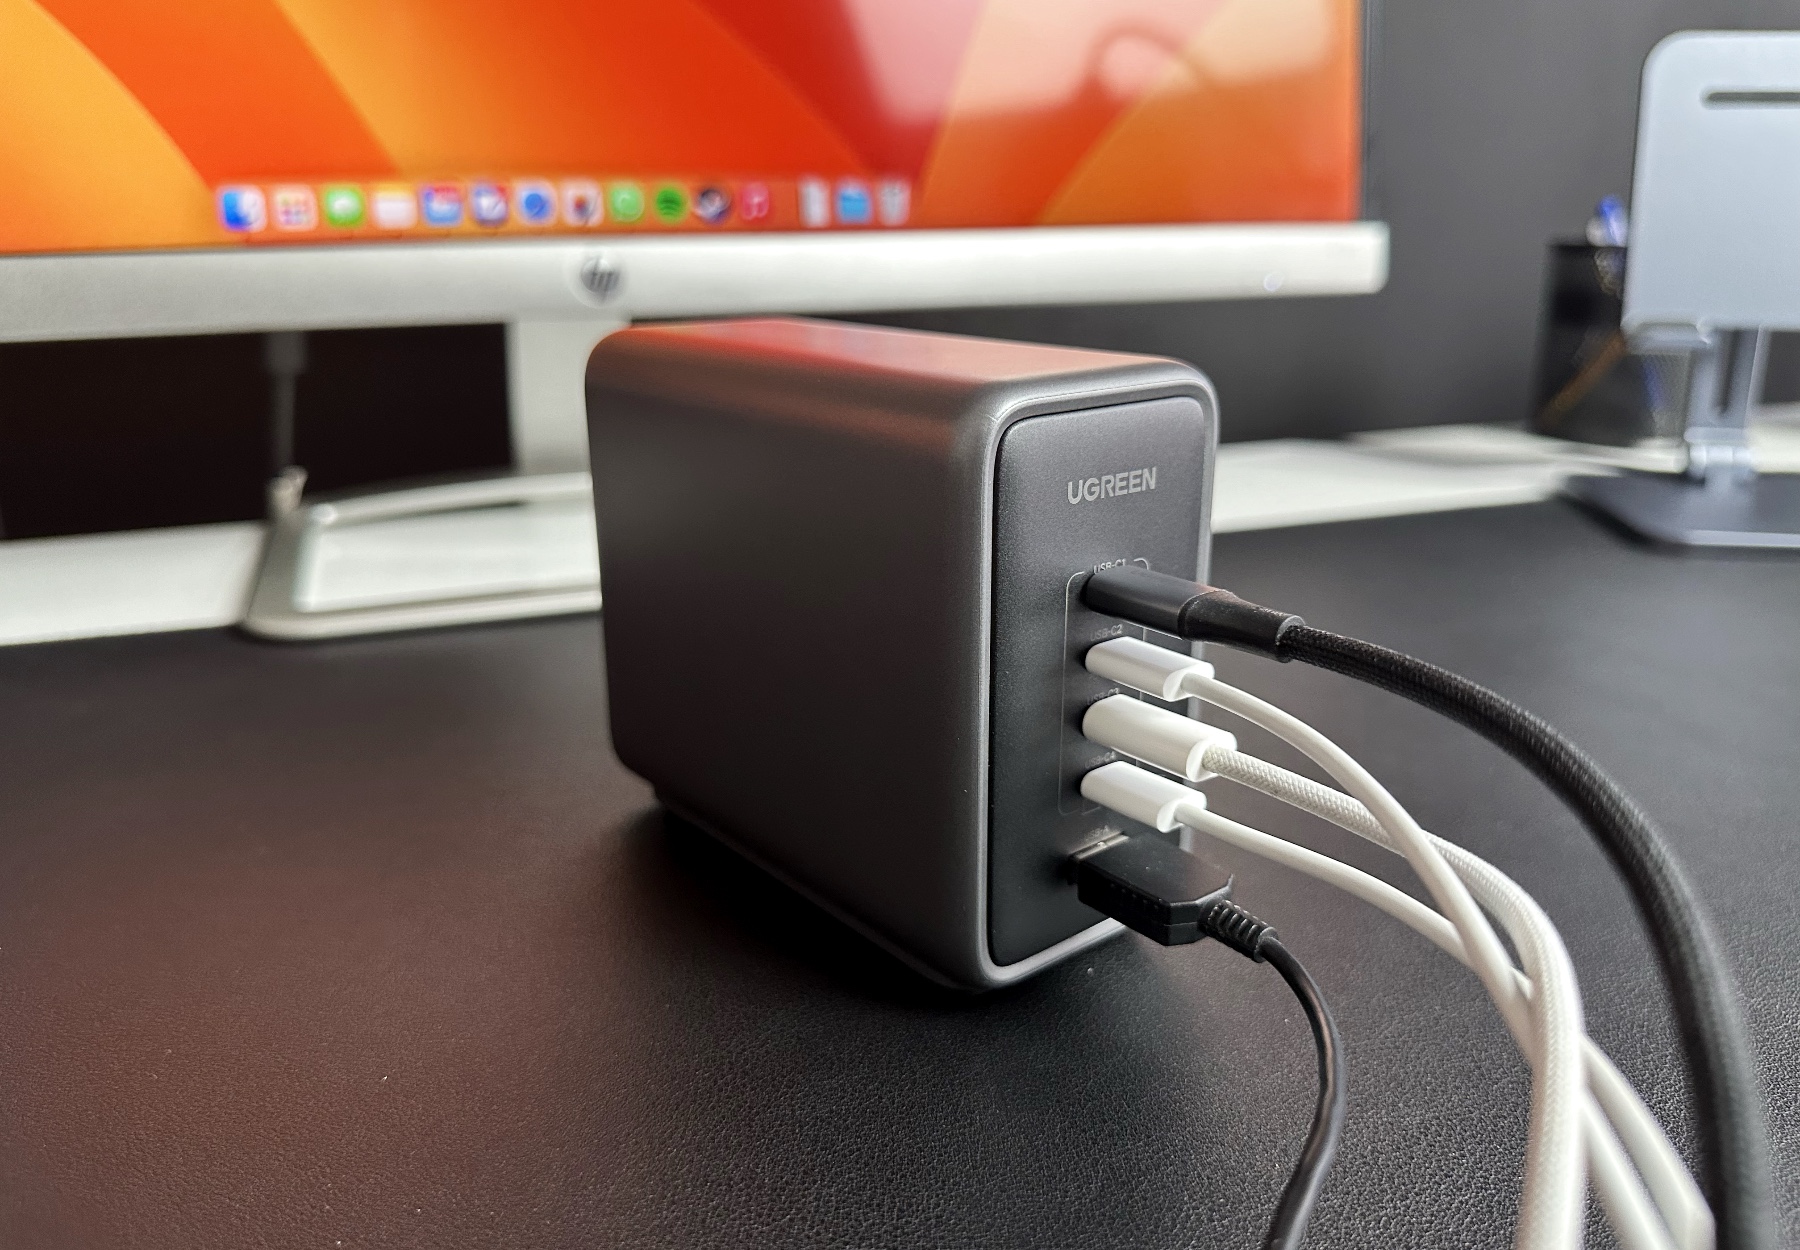 Ugreen Nexode Pro Series Review: Small but Powerful Wall Chargers